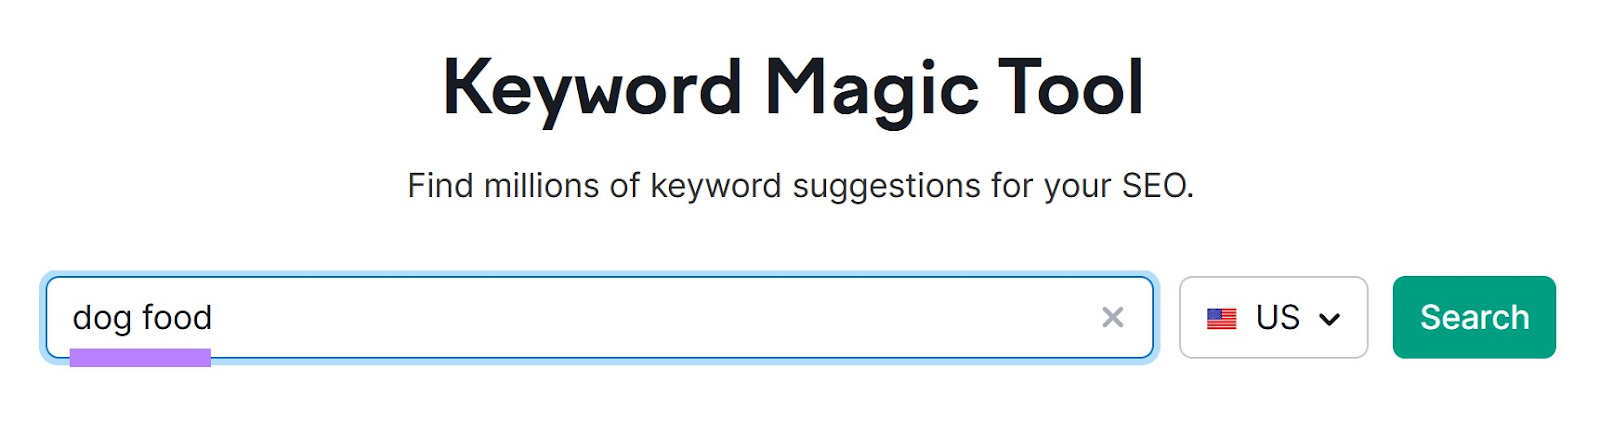 search for “dog food” in Keyword Magic Tool